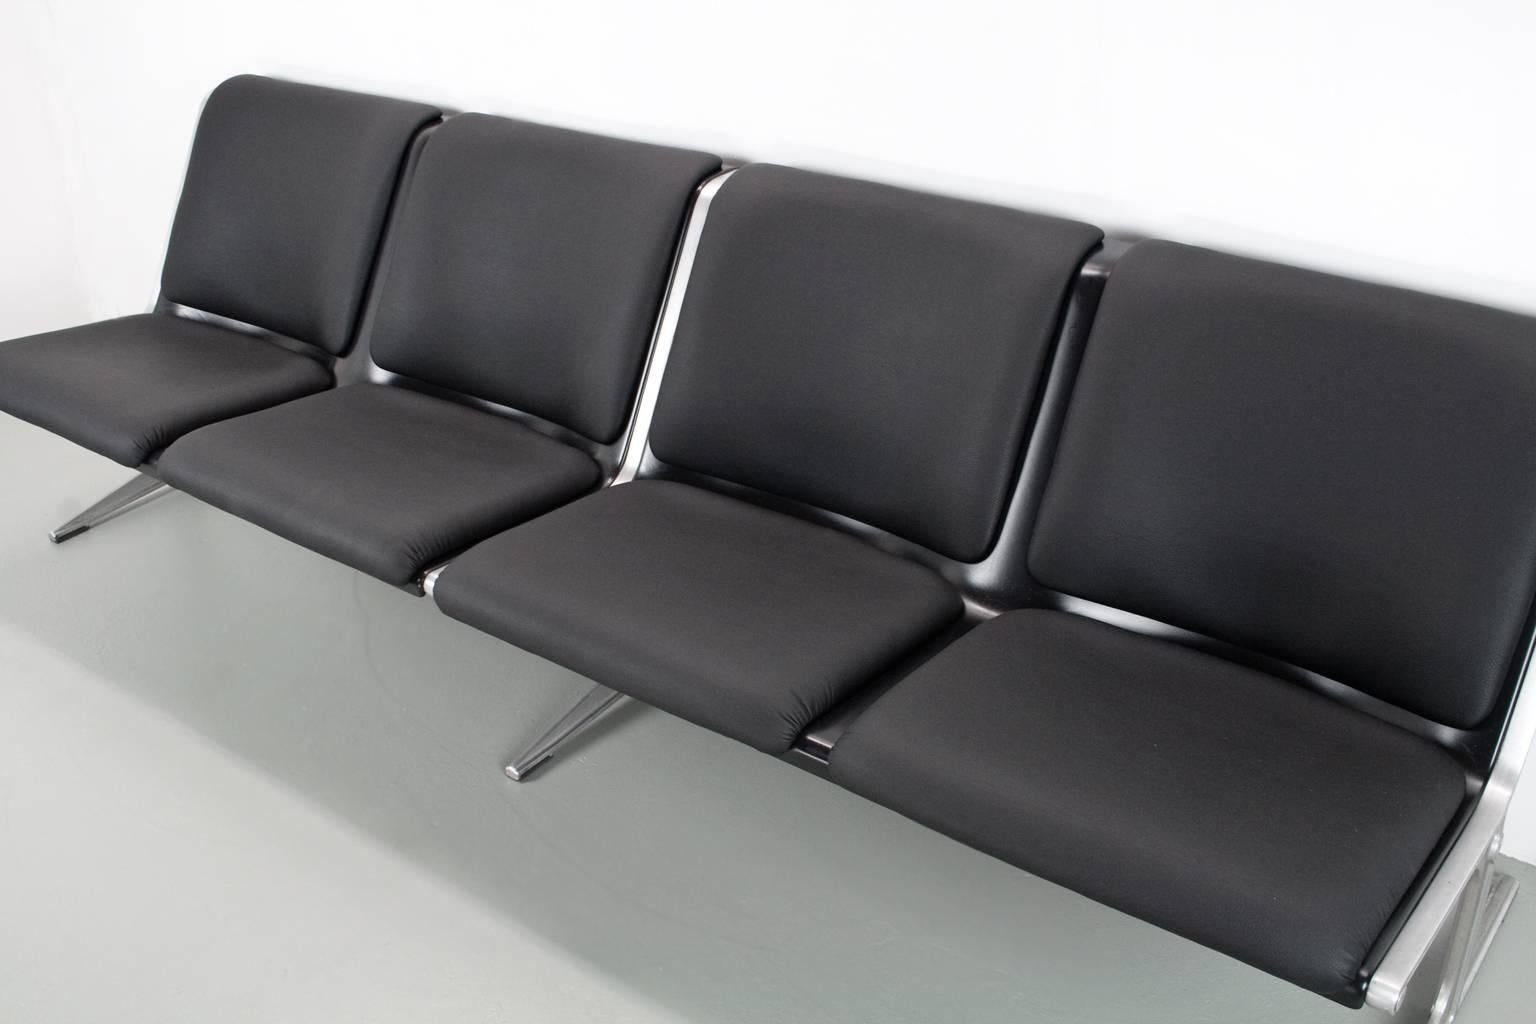 Re-upholstered four-seat bench by Dutch Industrial designer Friso Kramer for Wilkhahn Germany in 1967. Originally the 120/2 sofa was designed to be used in public and outdoor spaces: to form endless rows of seating’s. But with this upholstered